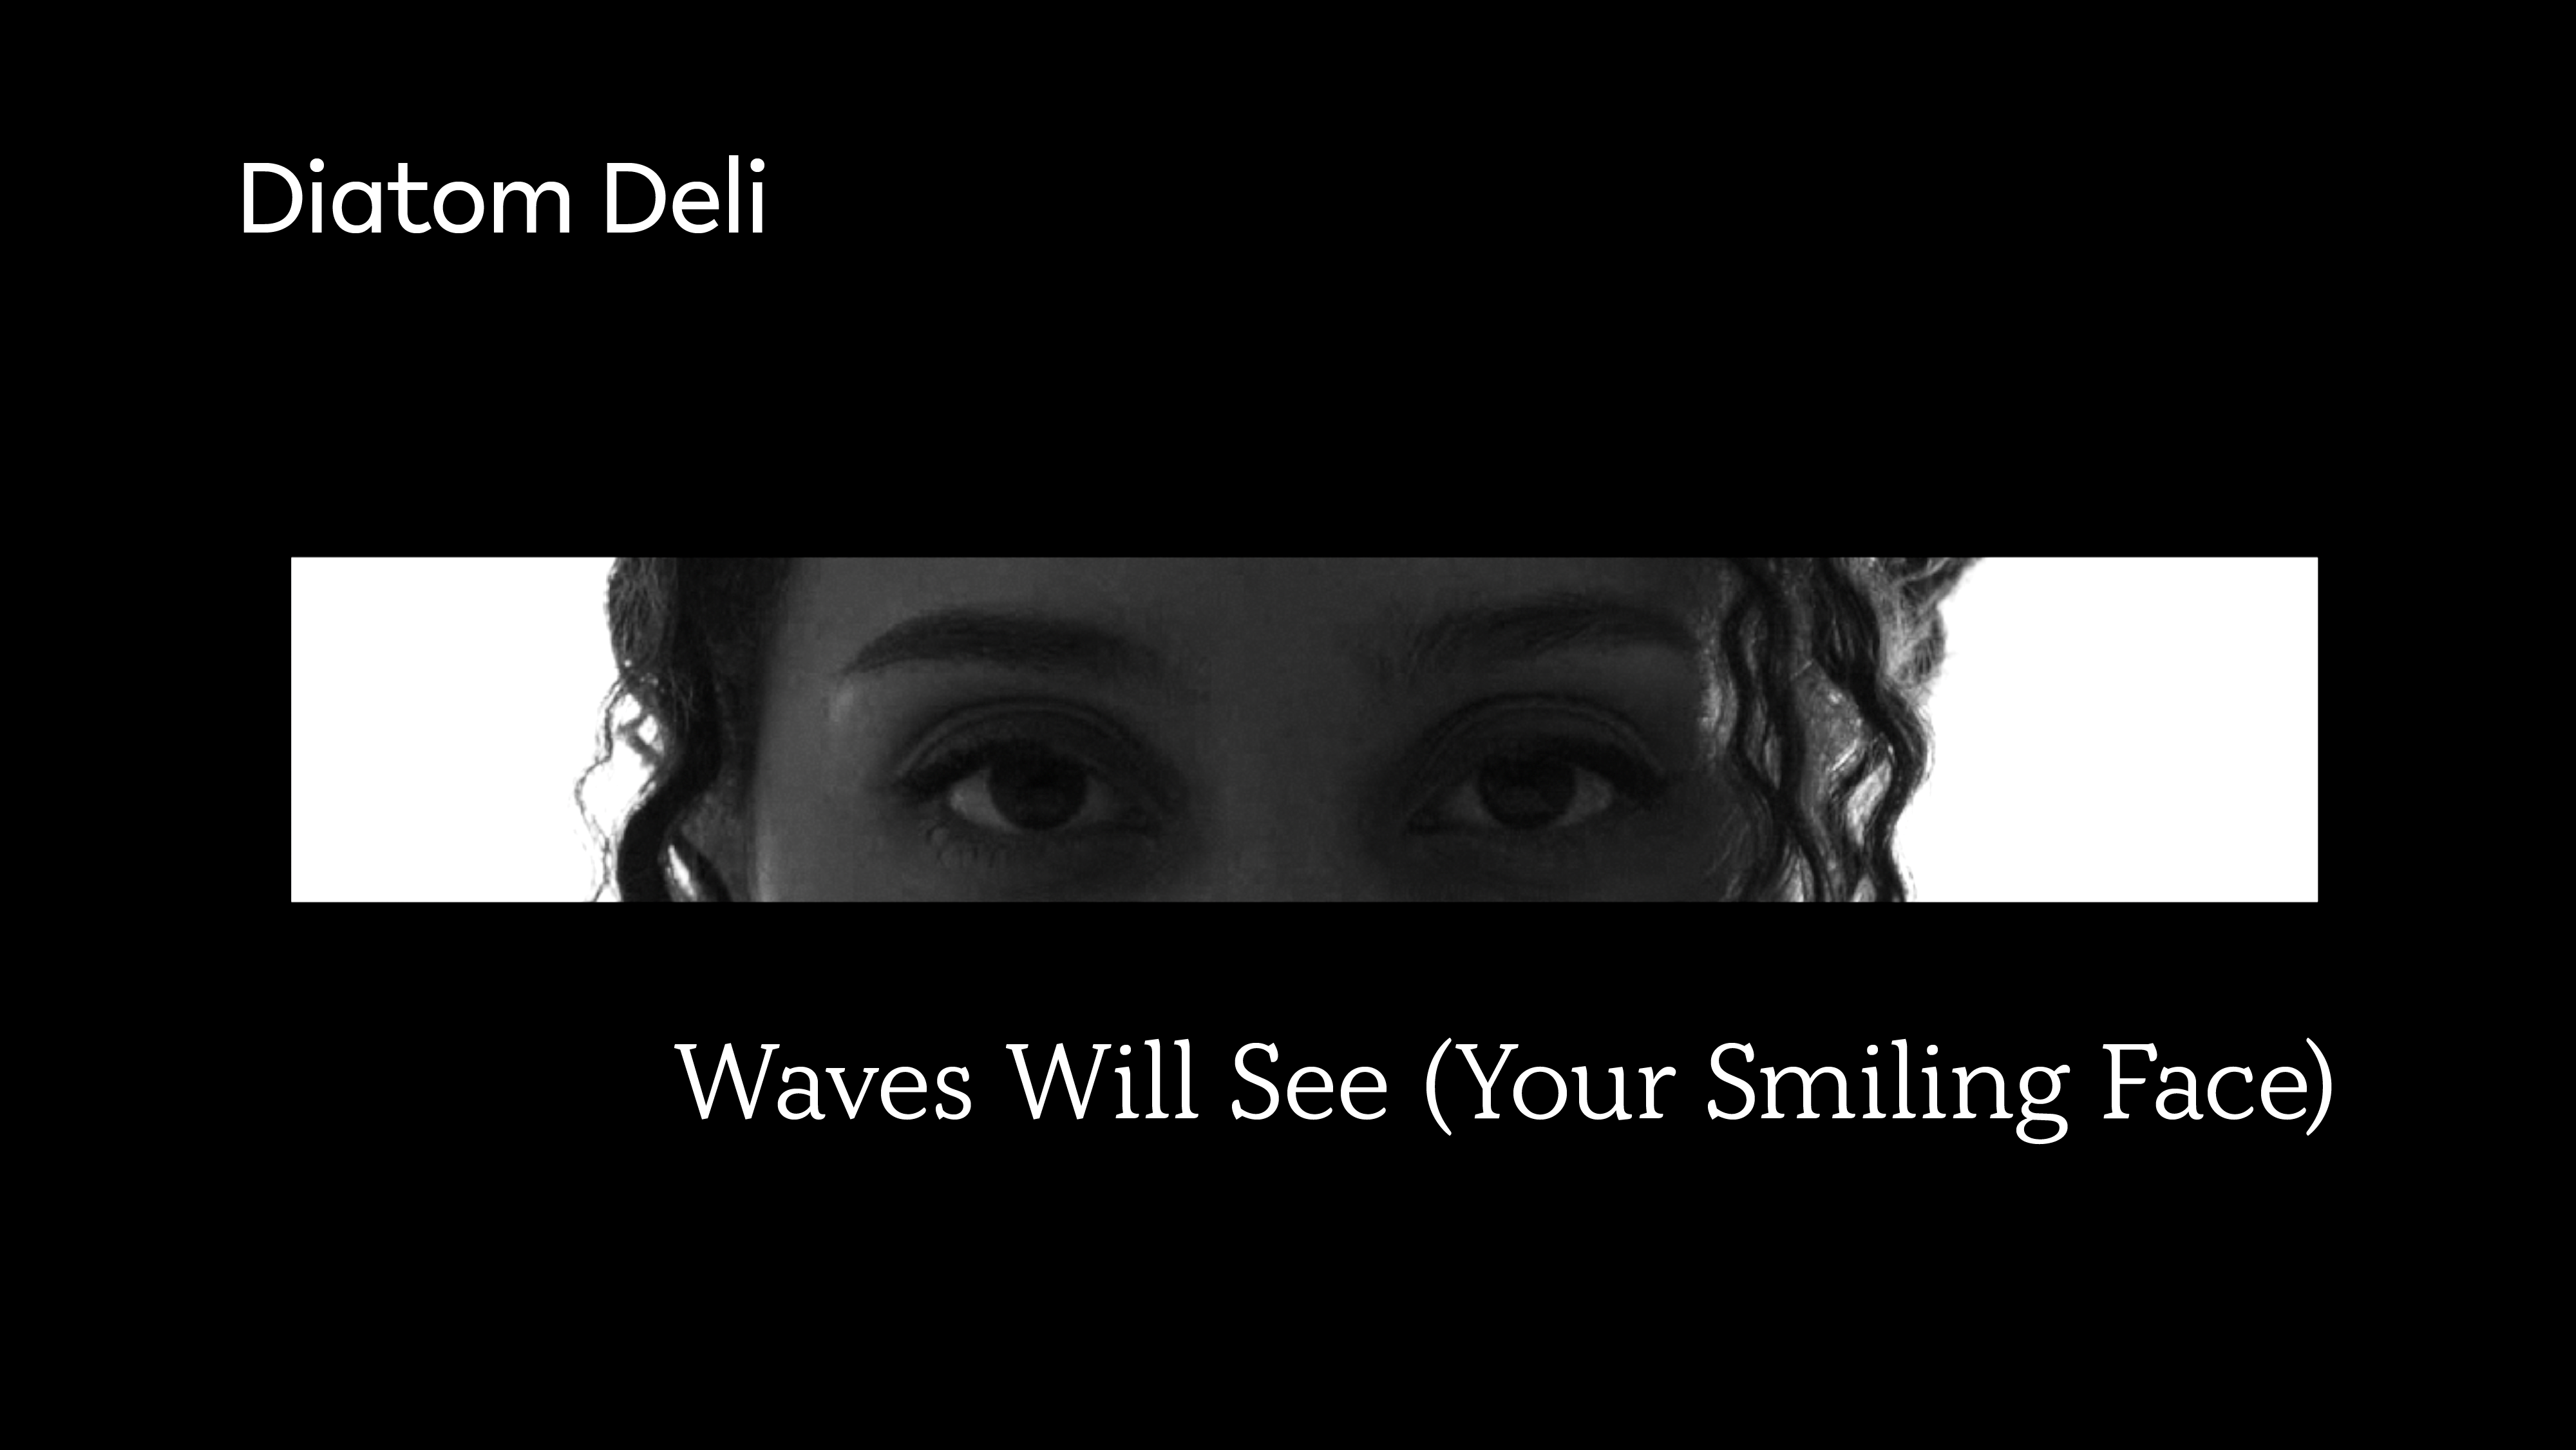 Link to Video for Waves Will See (Your Smiling Face)